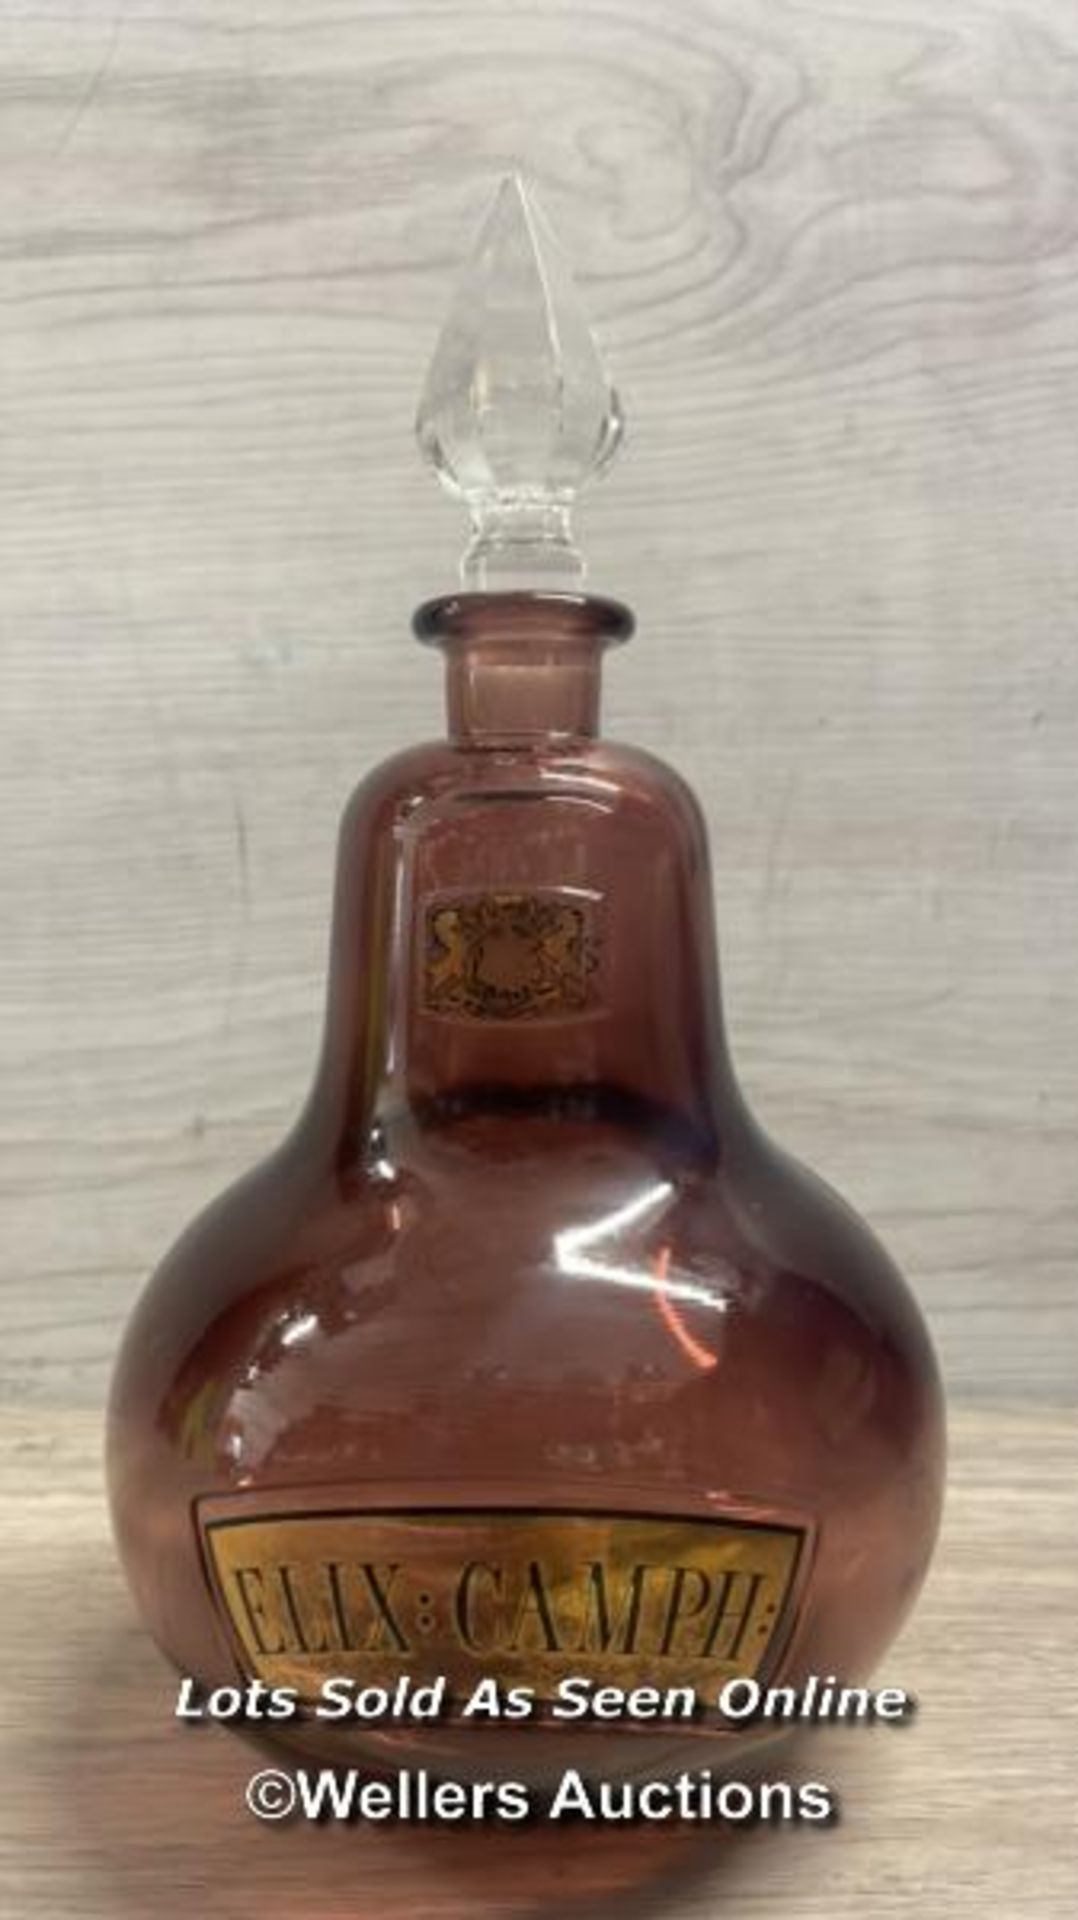 A RARE ROYAL PHARMACEUTICAL SOCIETY APOTHECARY BOTTLE, C1960'S, IN DARK MAUVE GLASS WITH GOLD LEAF